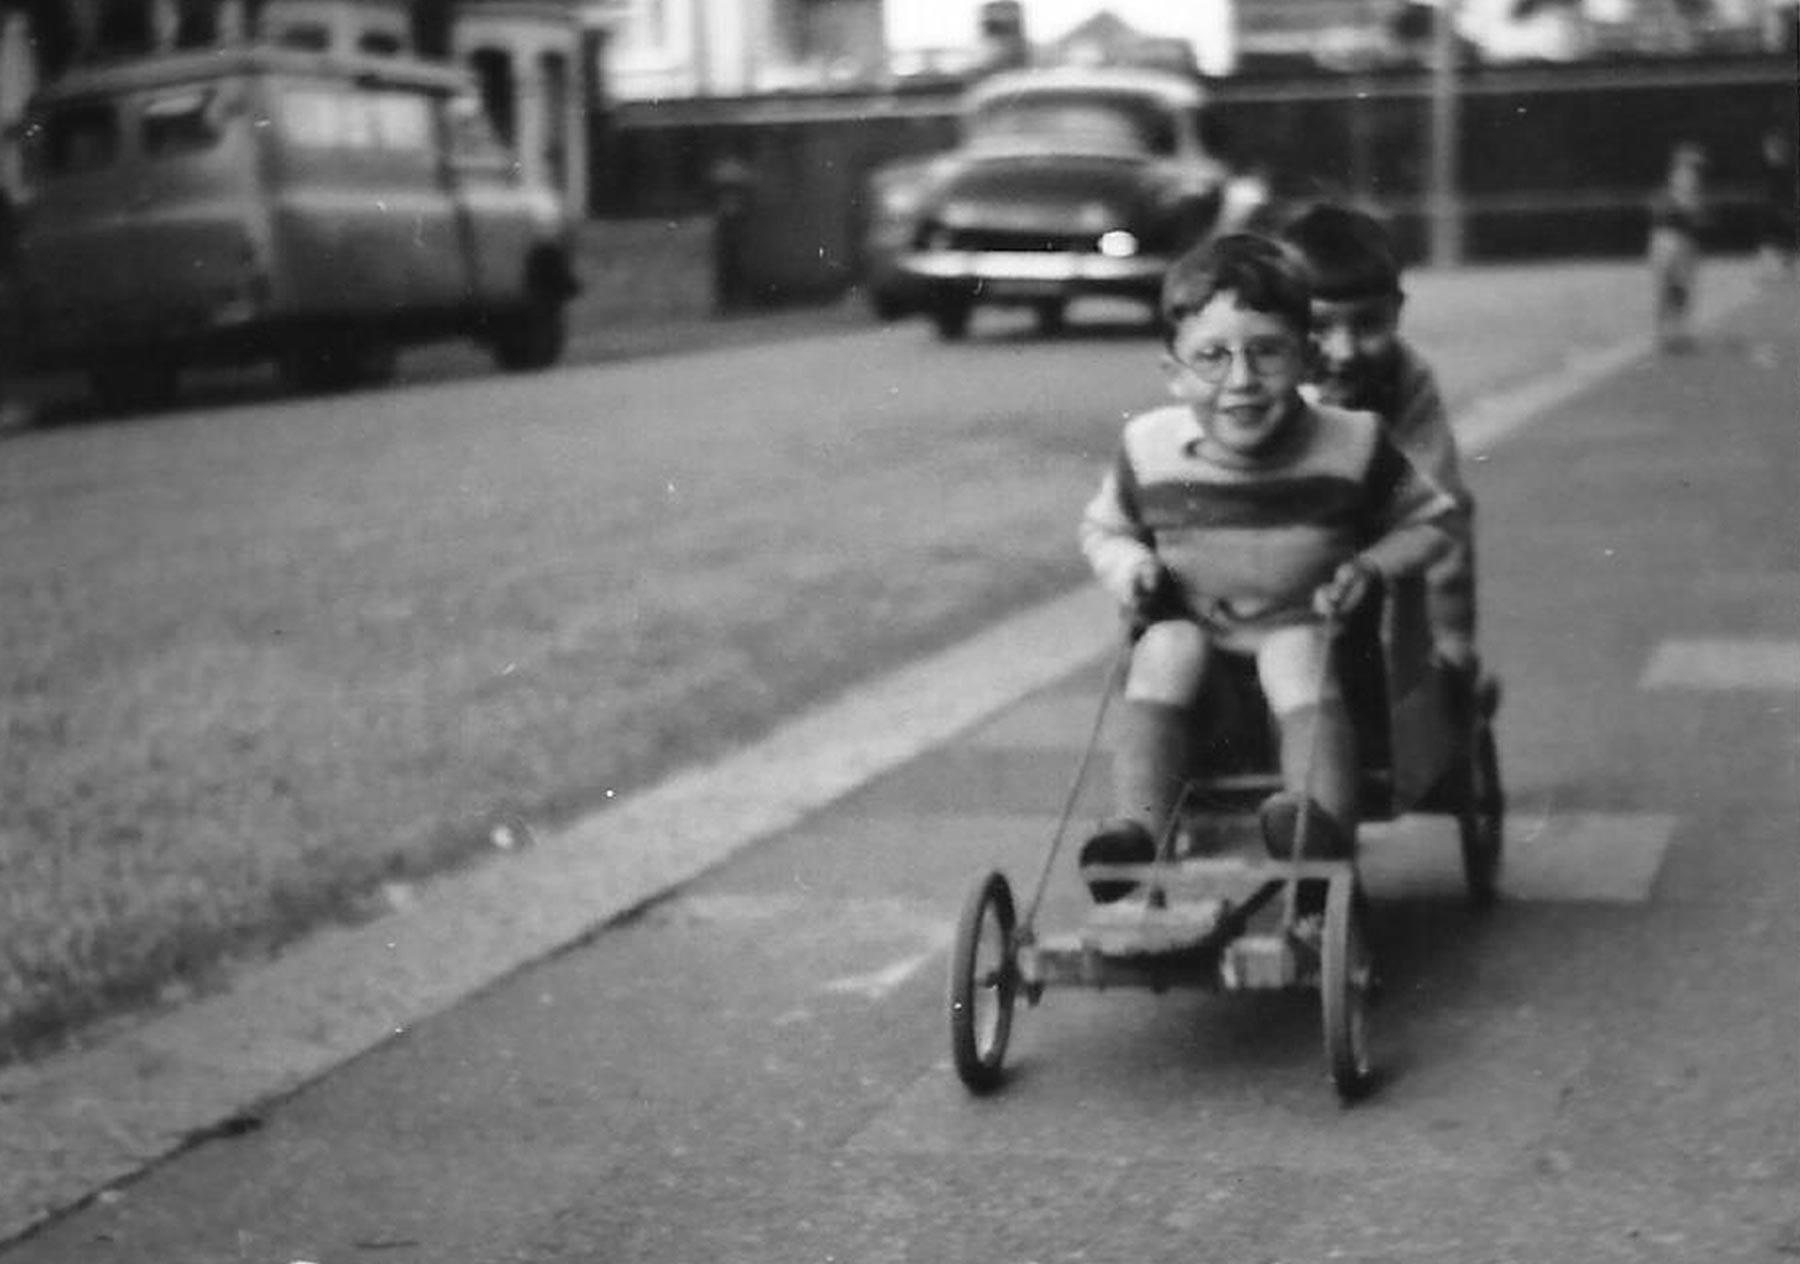 Old photo of children riding a go cart in the street